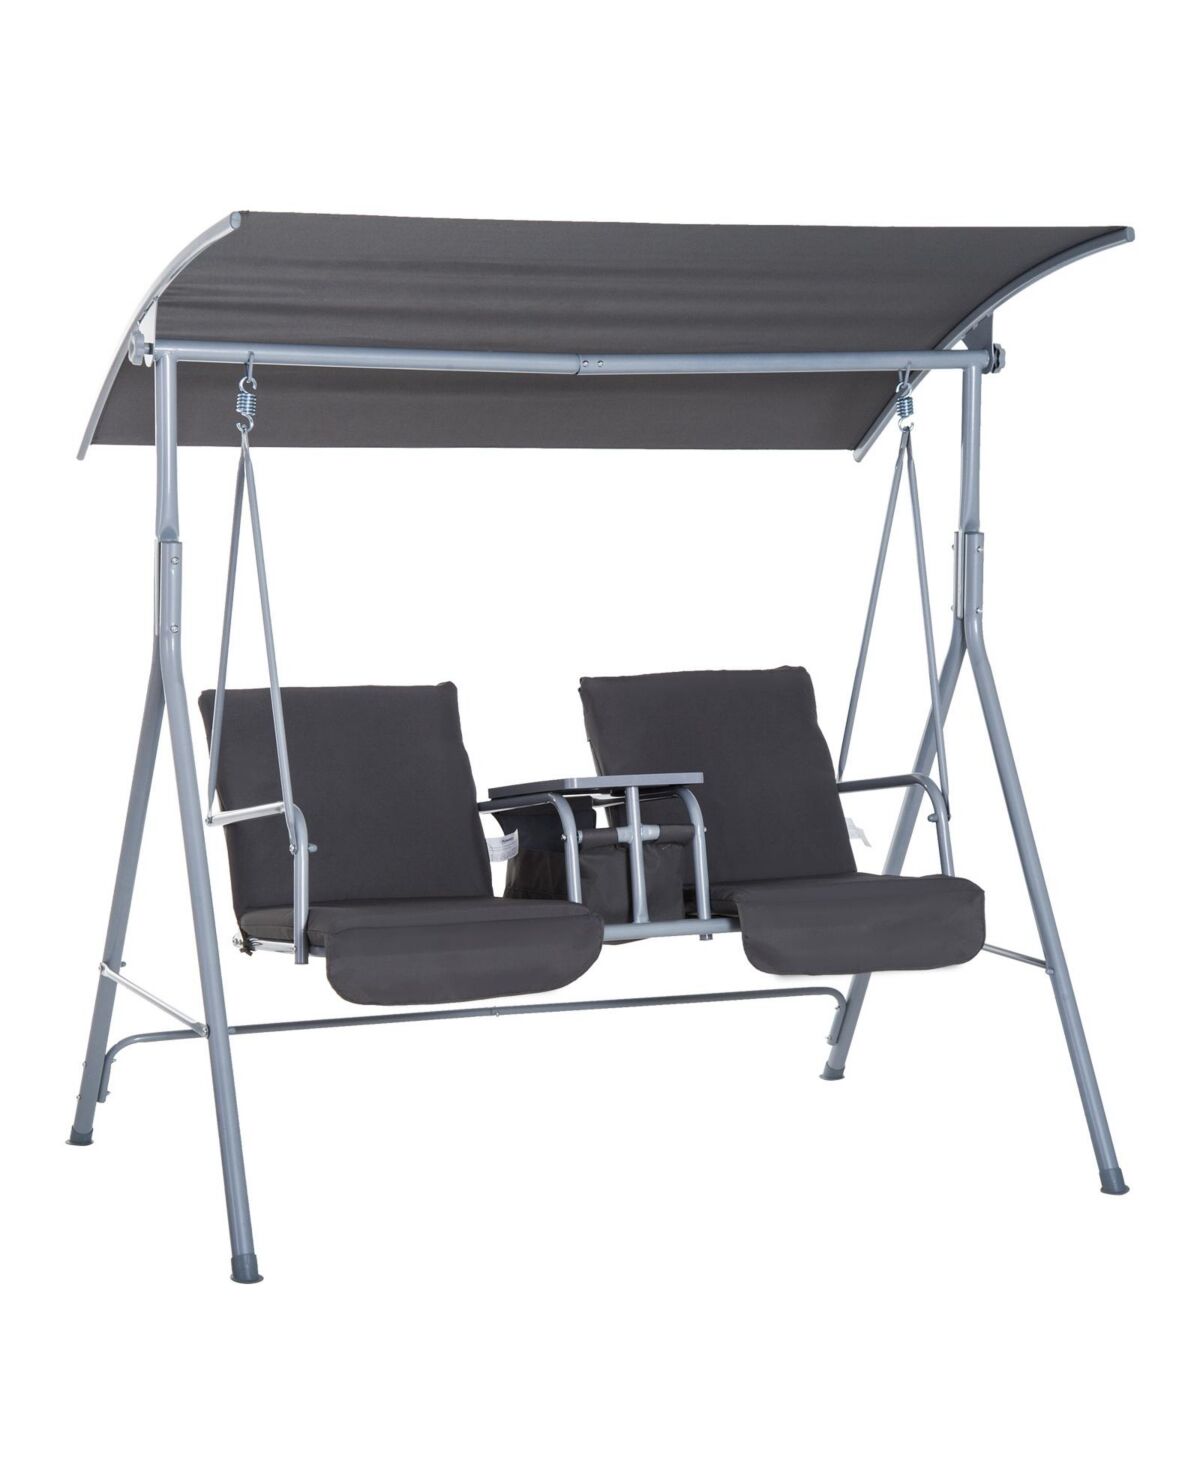 Outsunny 2 Person Porch Covered Swing Outdoor with Canopy, Table and Storage Console, Grey - Grey